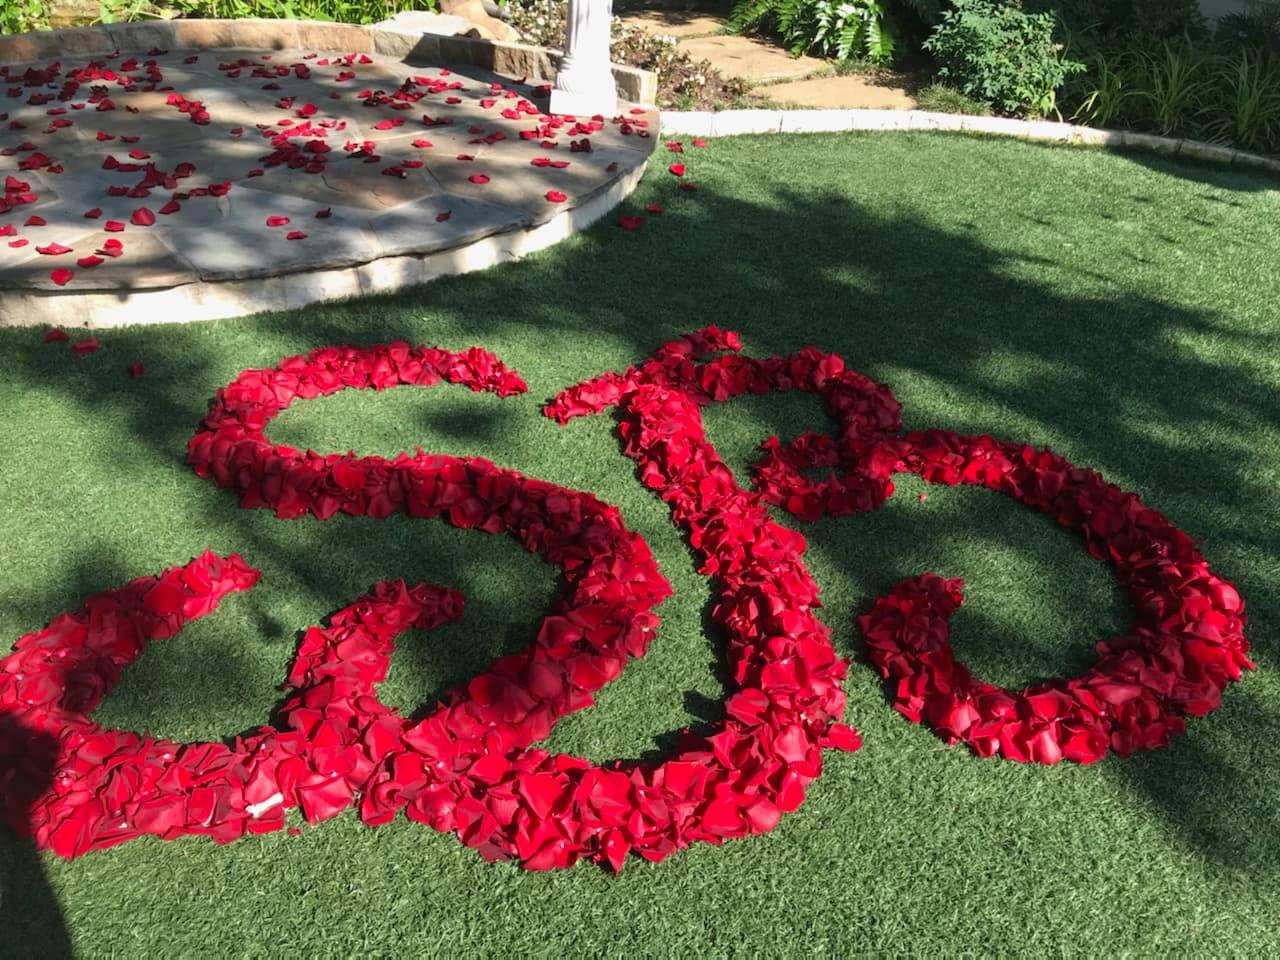 A large number of red roses on the ground.